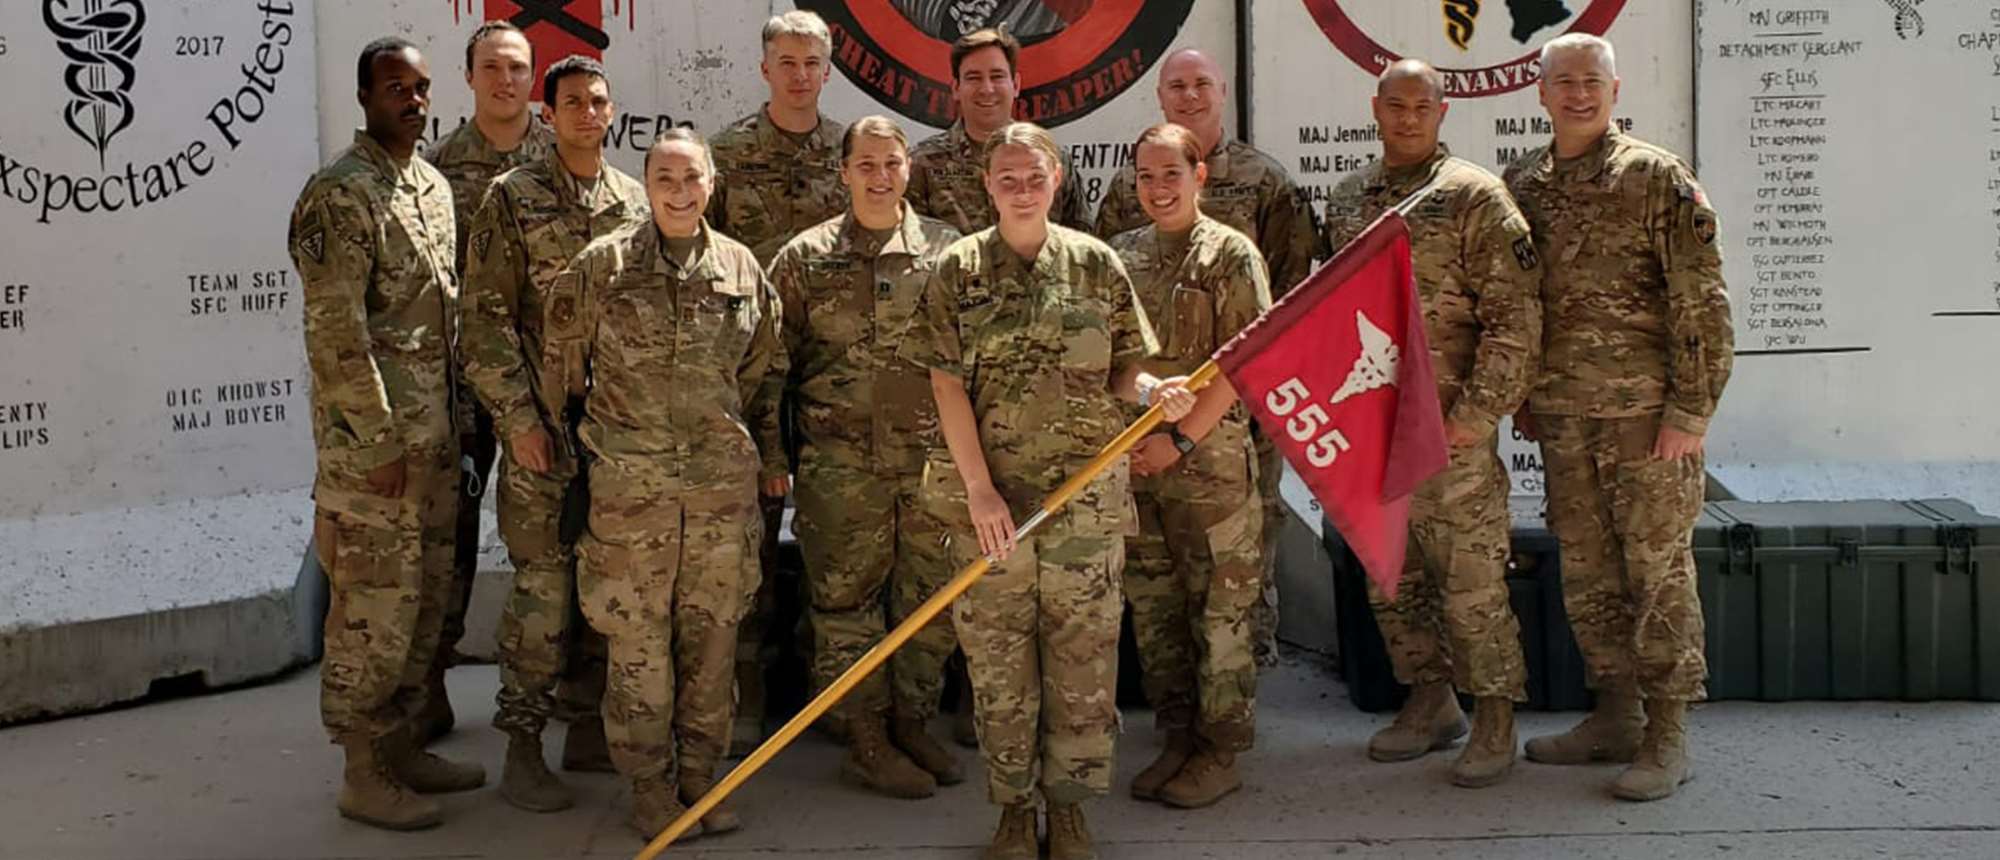 MCW and U.S. Army join forces to save lives